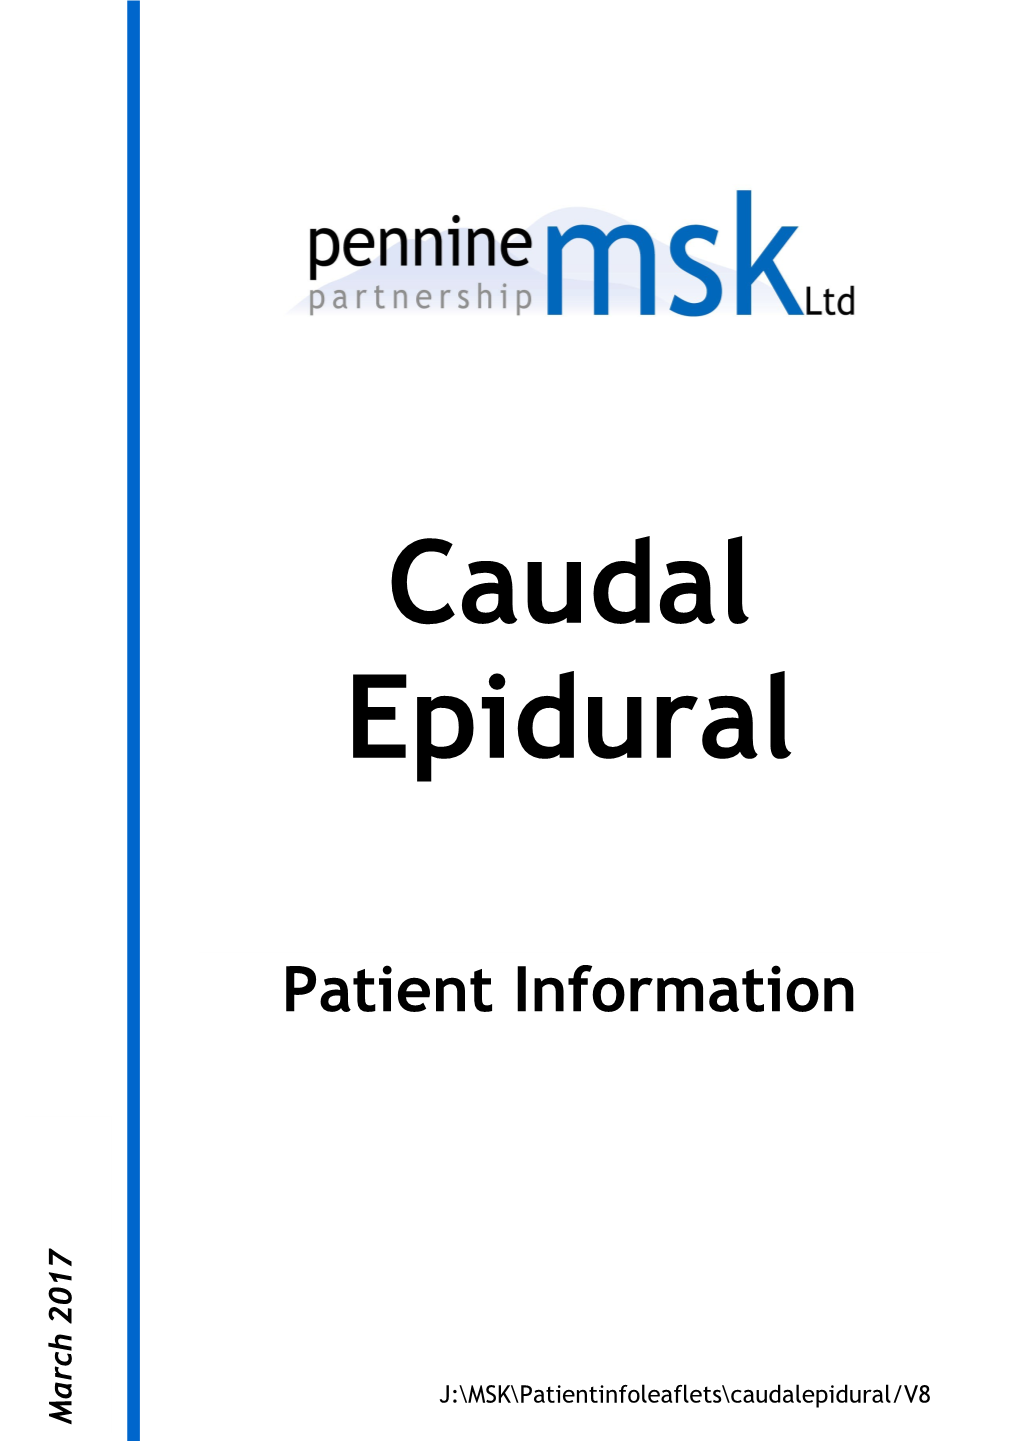 What Is a Caudal Epidural Injection?